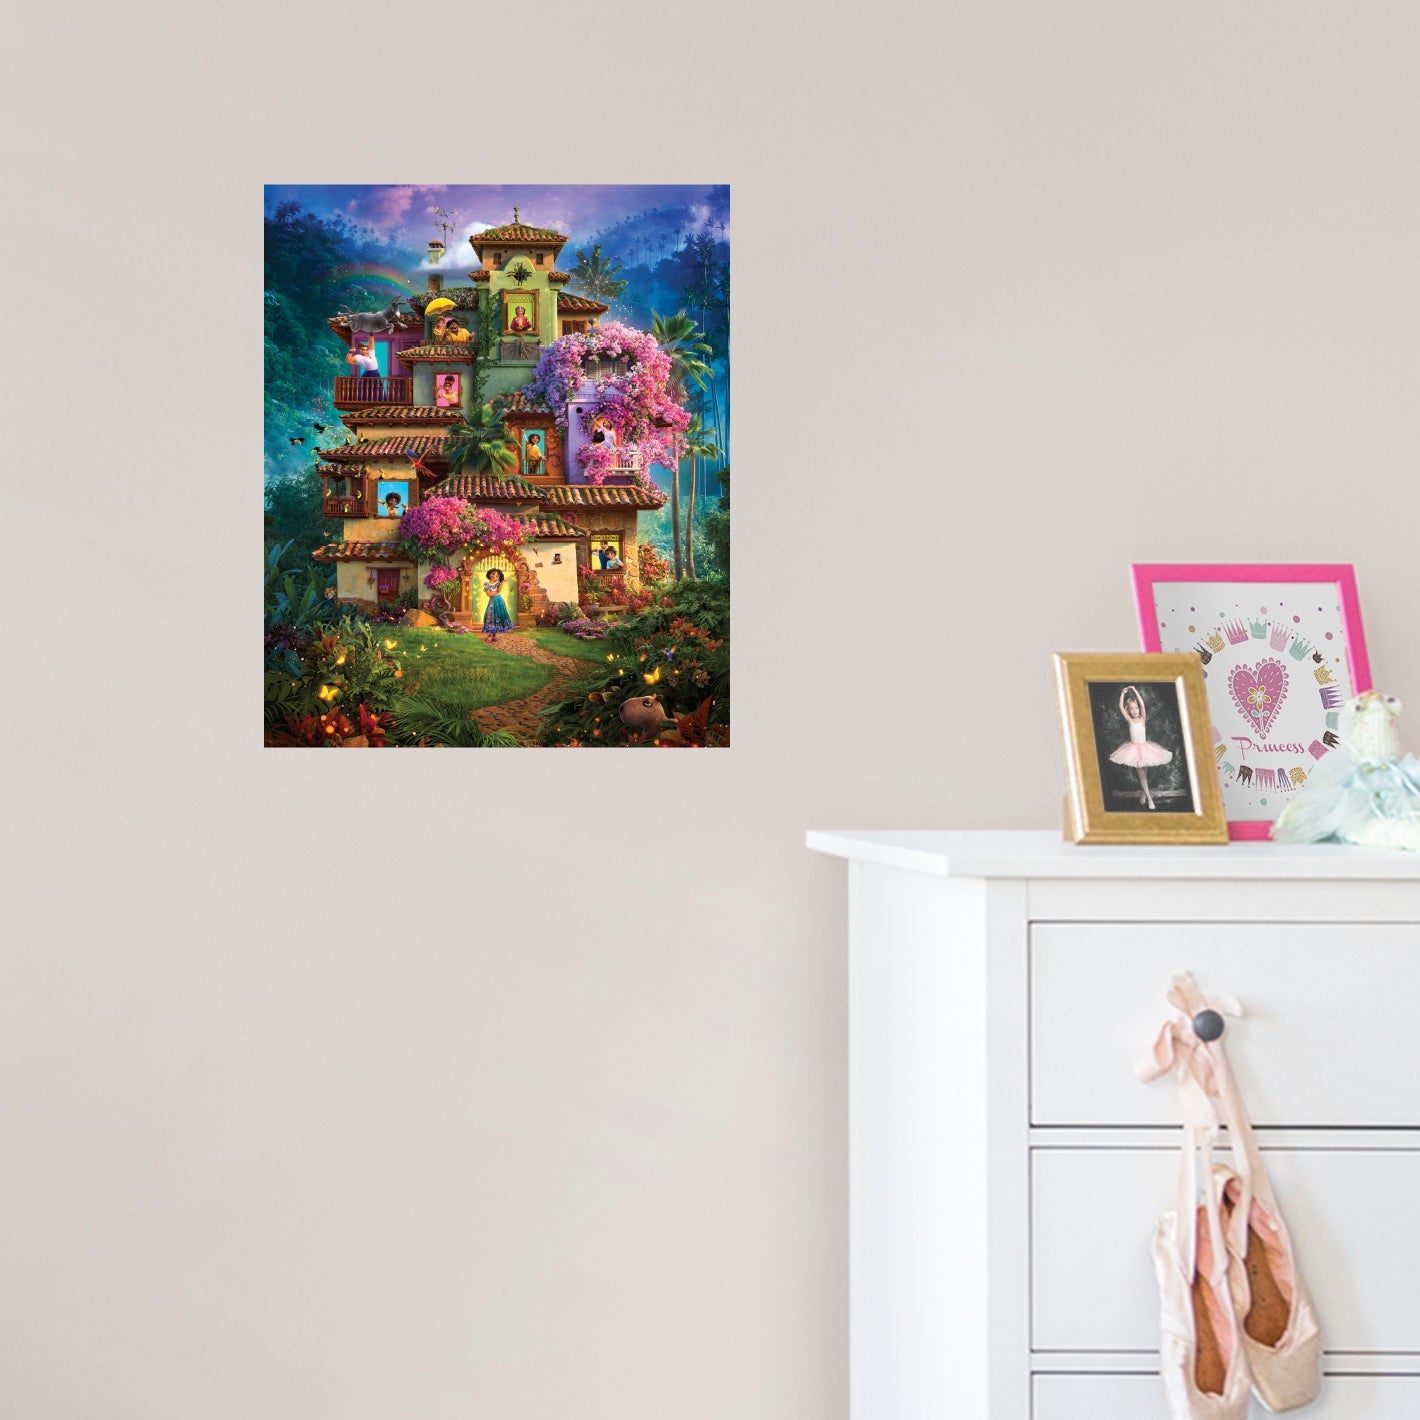 Encanto: Magical Casa Madrigal Poster - Officially Licensed Disney Removable Adhesive Decal